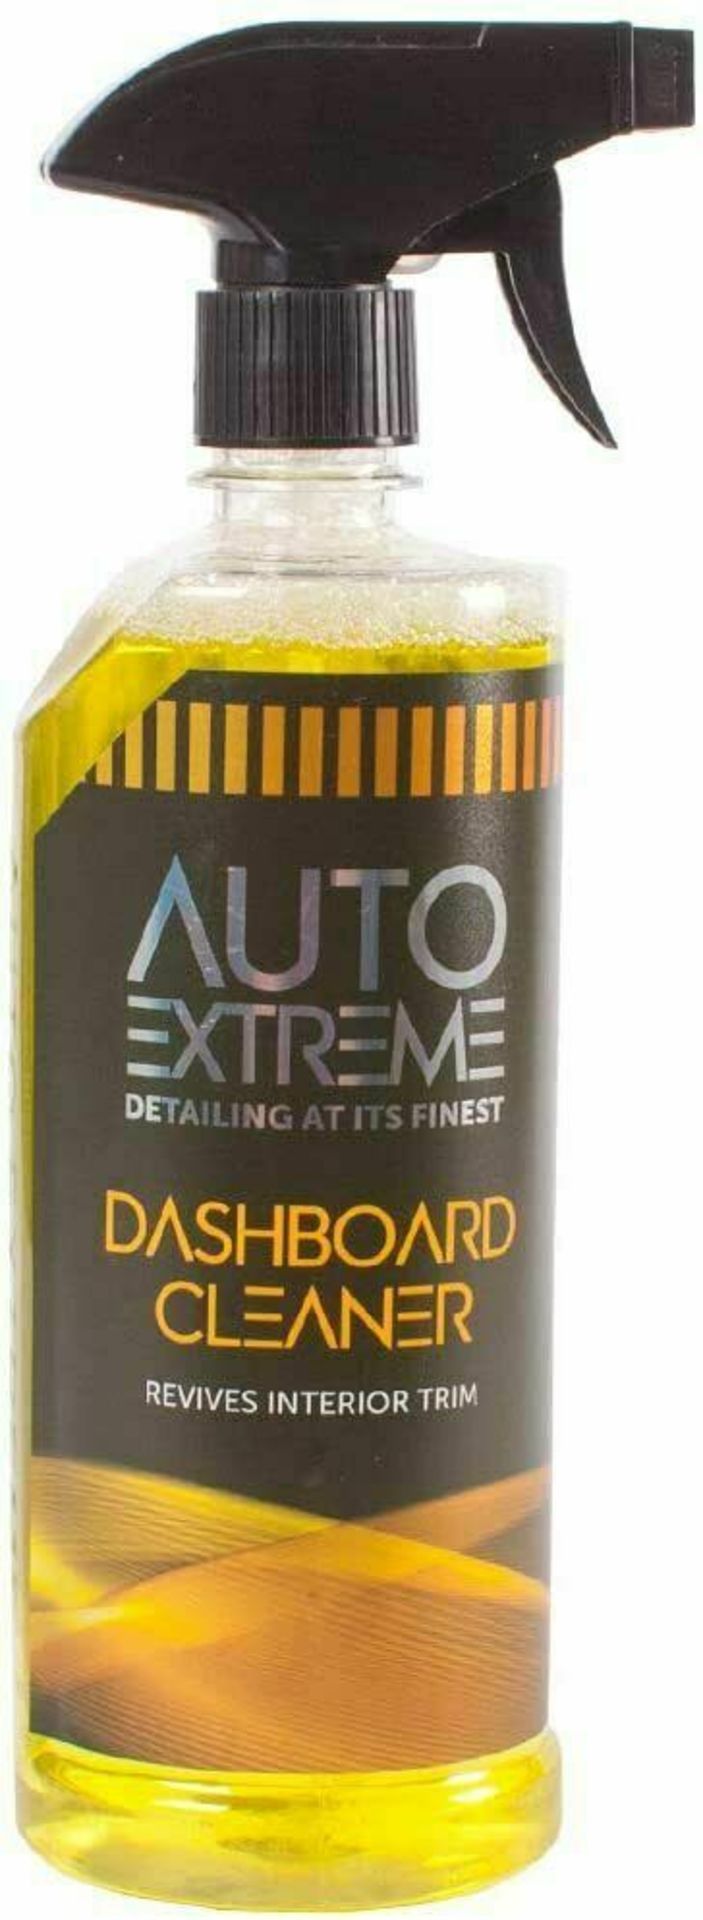 BRAND NEW BOTTLE OF AUTO EXTREME DASHBOARD CLEANER 720ML